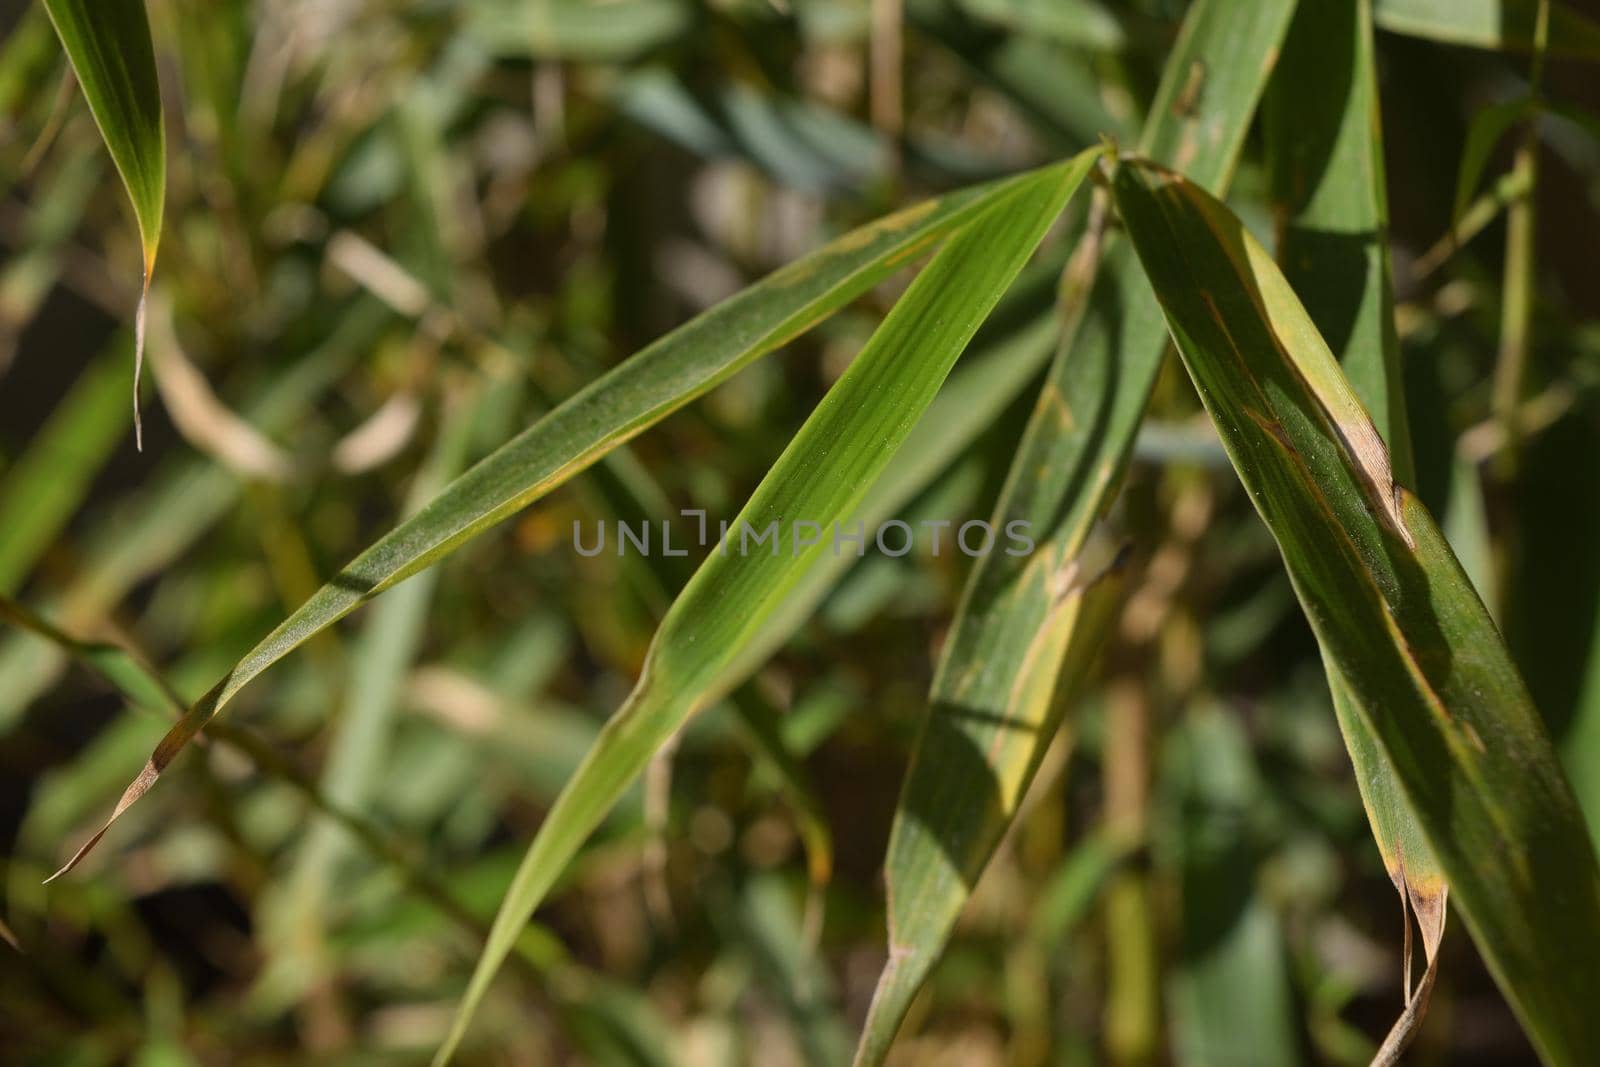 Close-up of a particular variety of bamboo called Fargesia rufa Green Panda